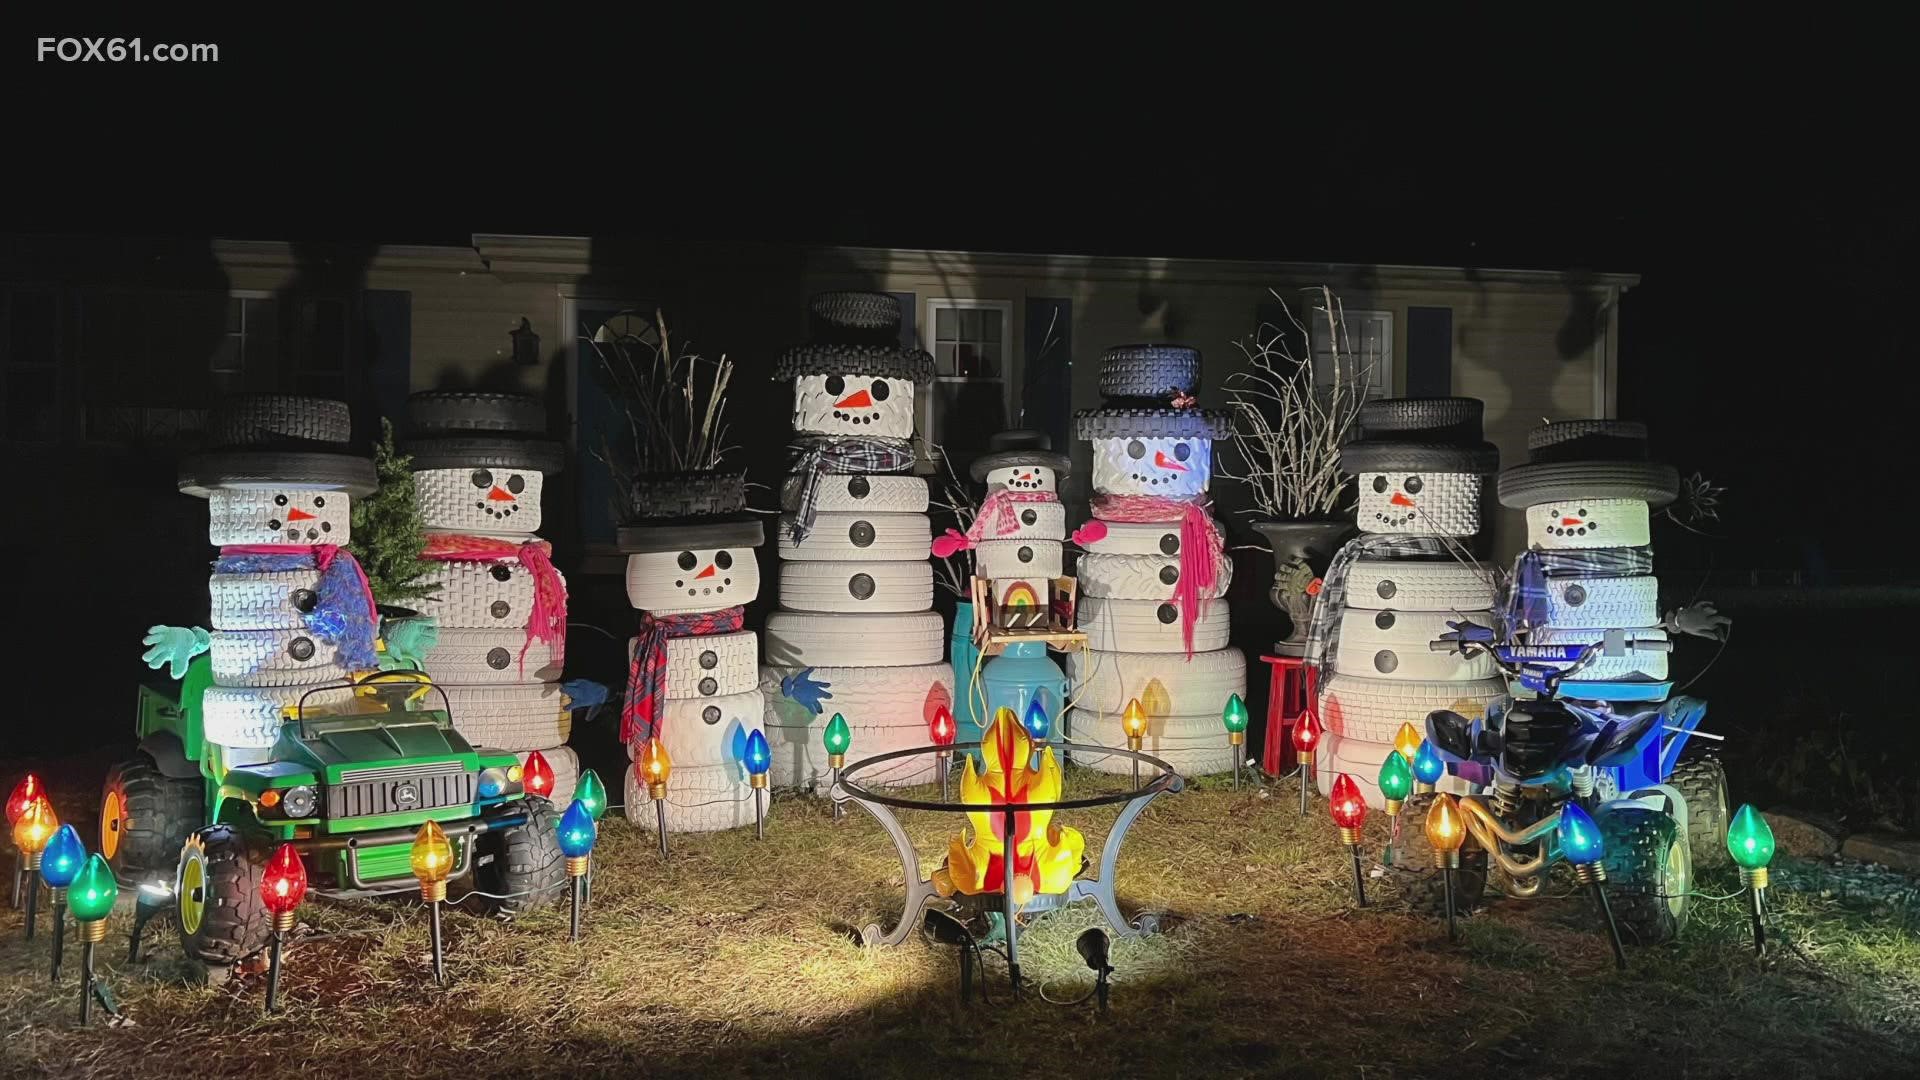 Jennifer Baptiste of Ace of Space created a tire snowman family in her front yard and is collecting donations for a local food pantry and animal control center.